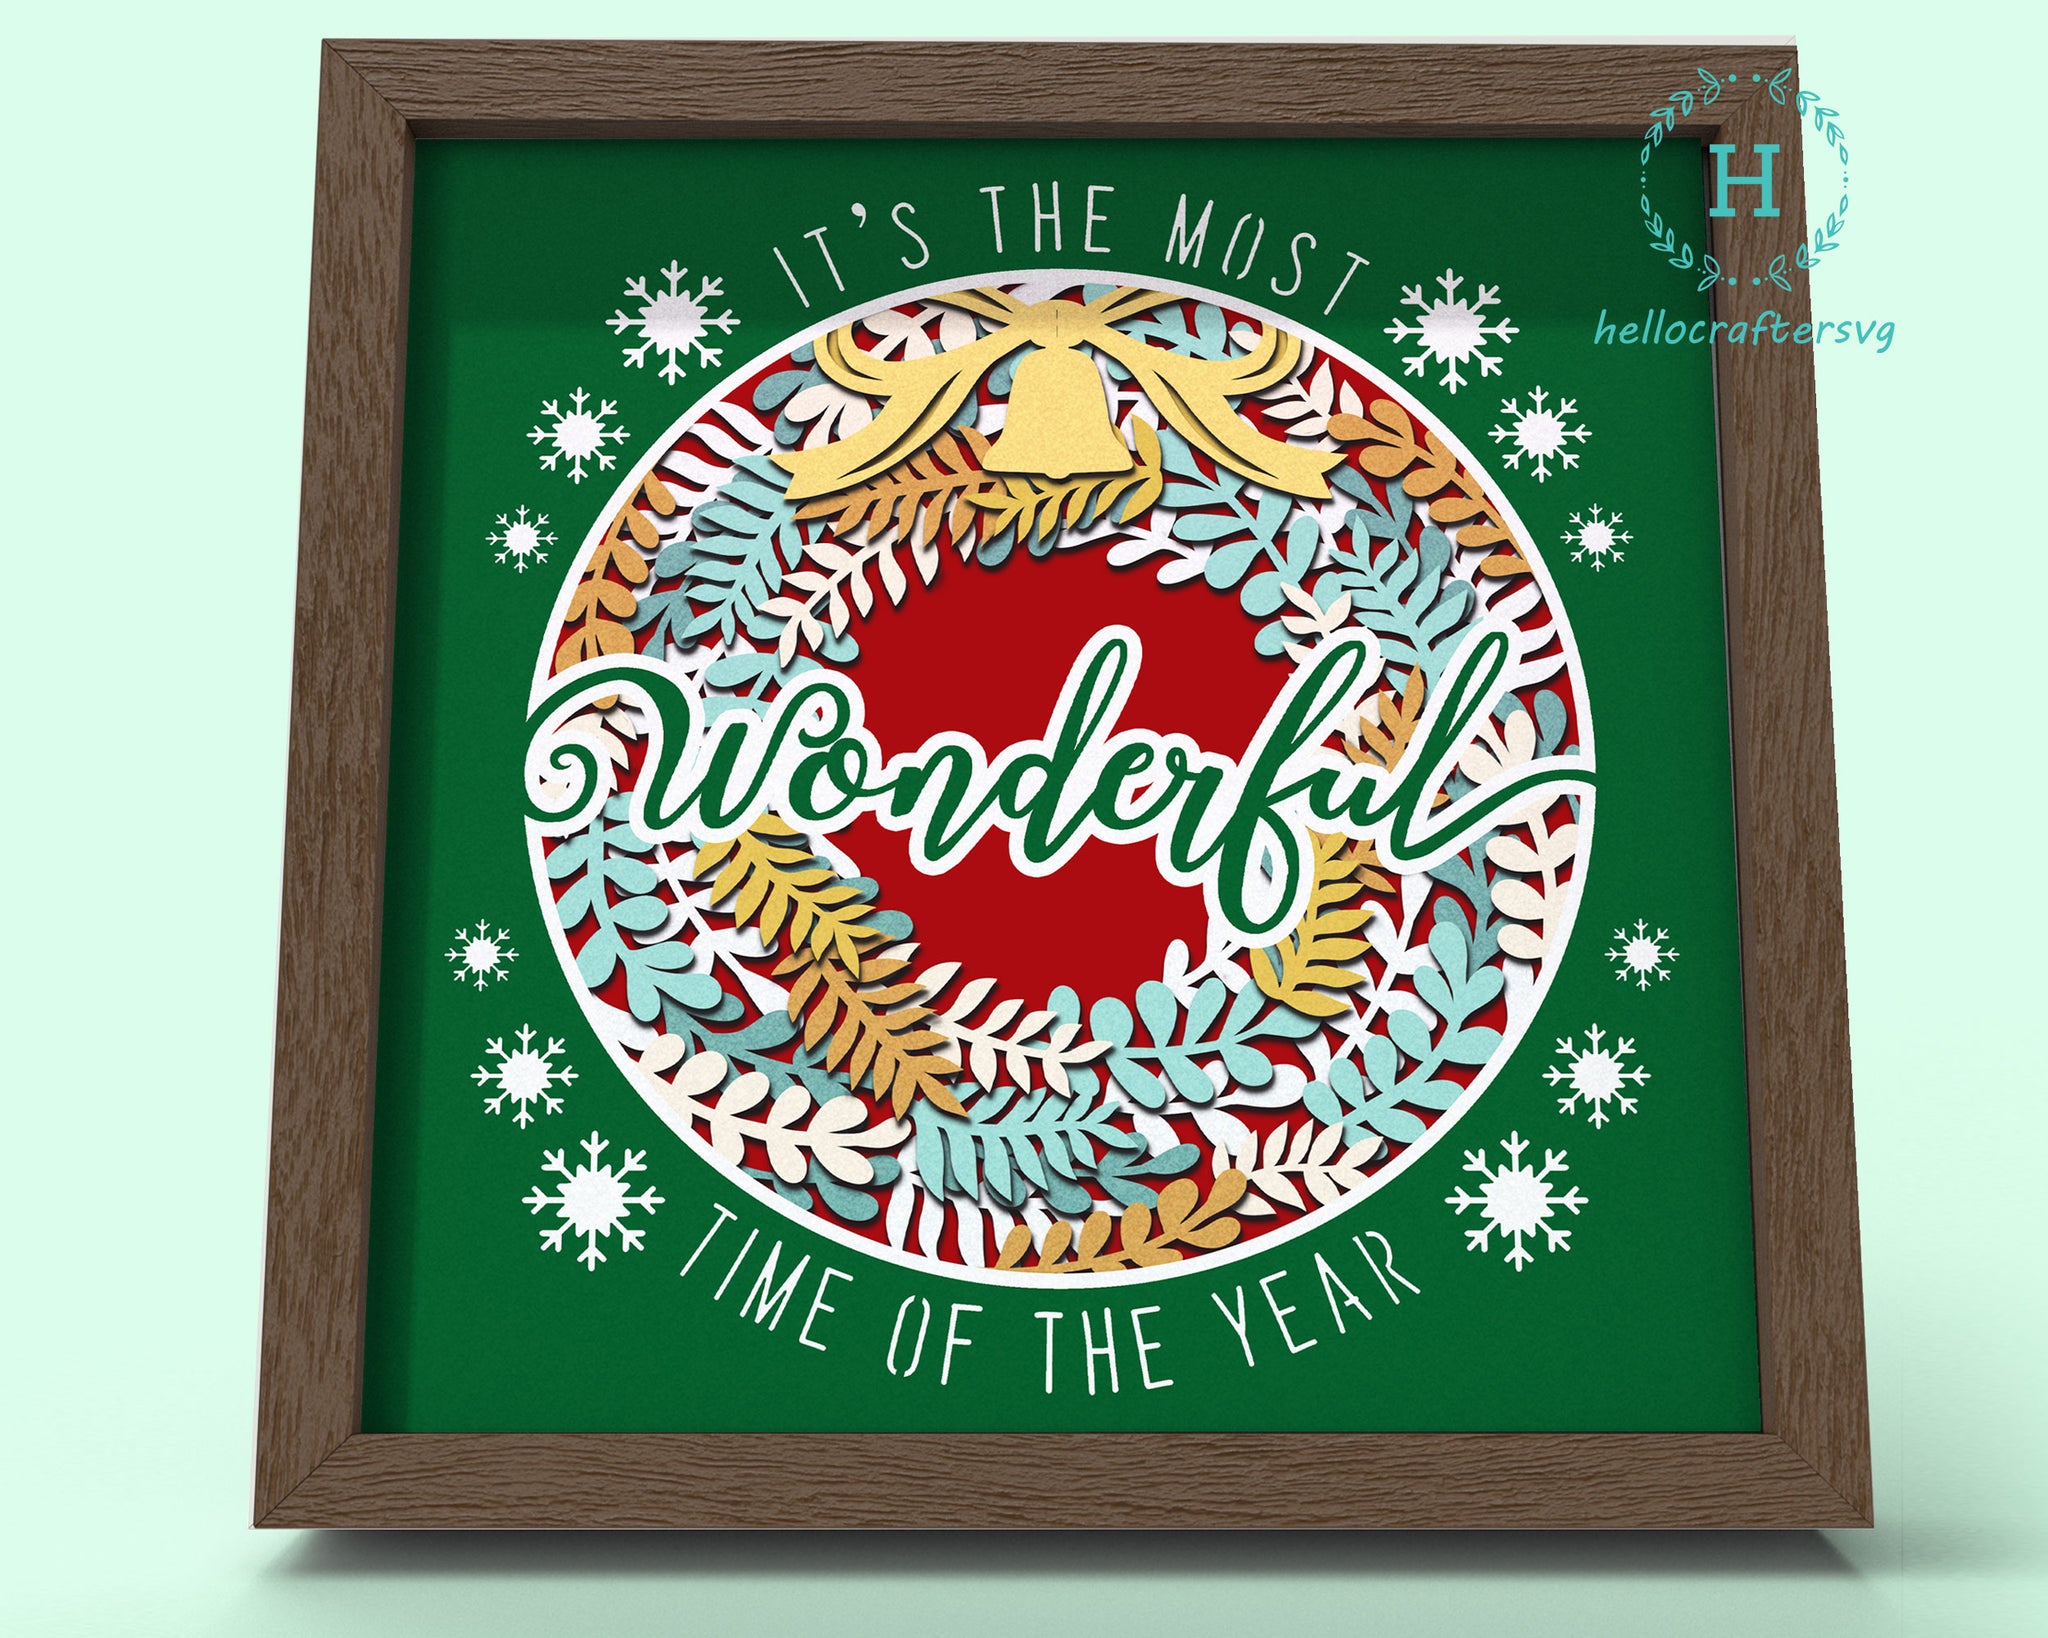 3d Wonderful Svg, CHRISTMAS Shadow Box Svg - Cricut Files, Cardstock Svg, Silhouette Files - HelloCrafterSvg.